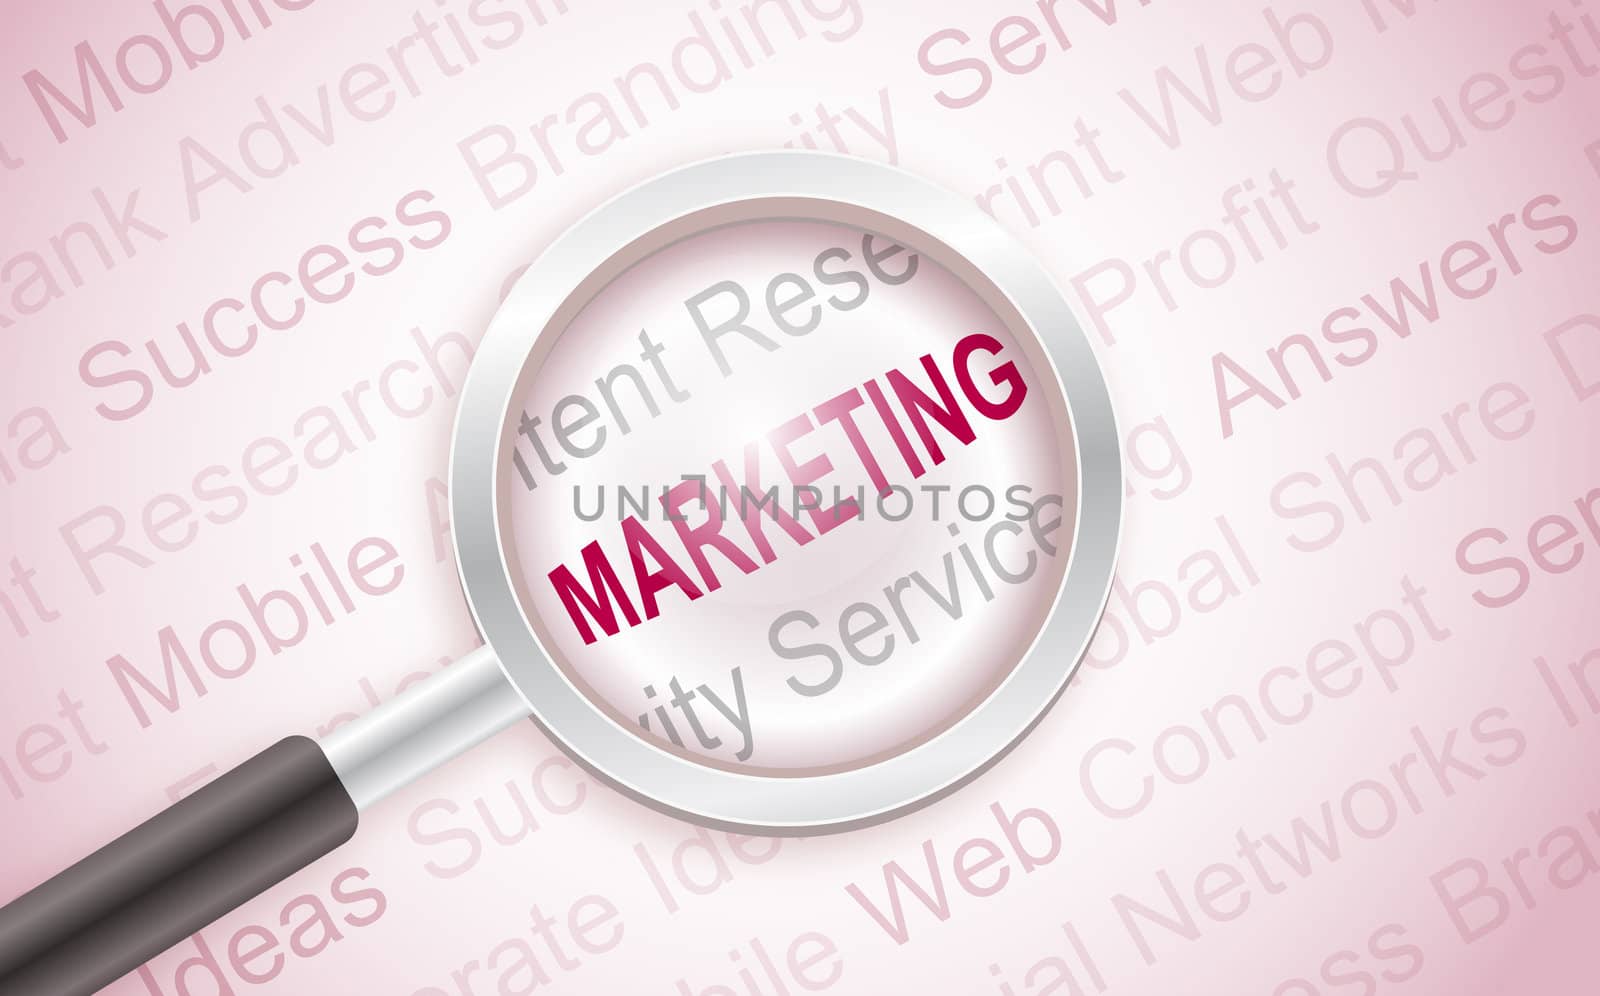 marketing with magnifying glass